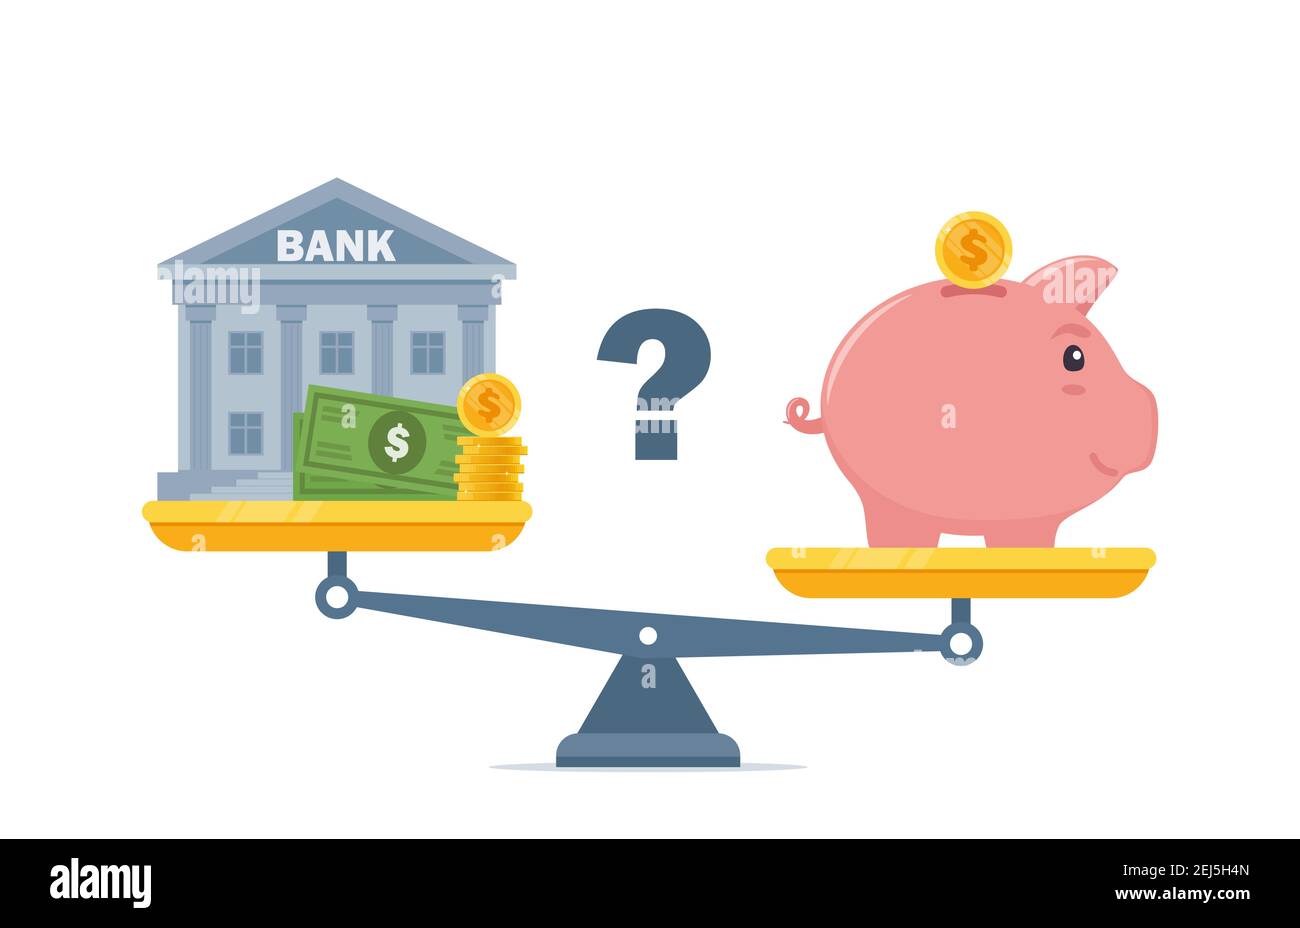 Bank and piggybank on scales, Choosing between them. Budget planning concept. Money savings investment and funding. Bank loan and economy choice. Fina Stock Vector